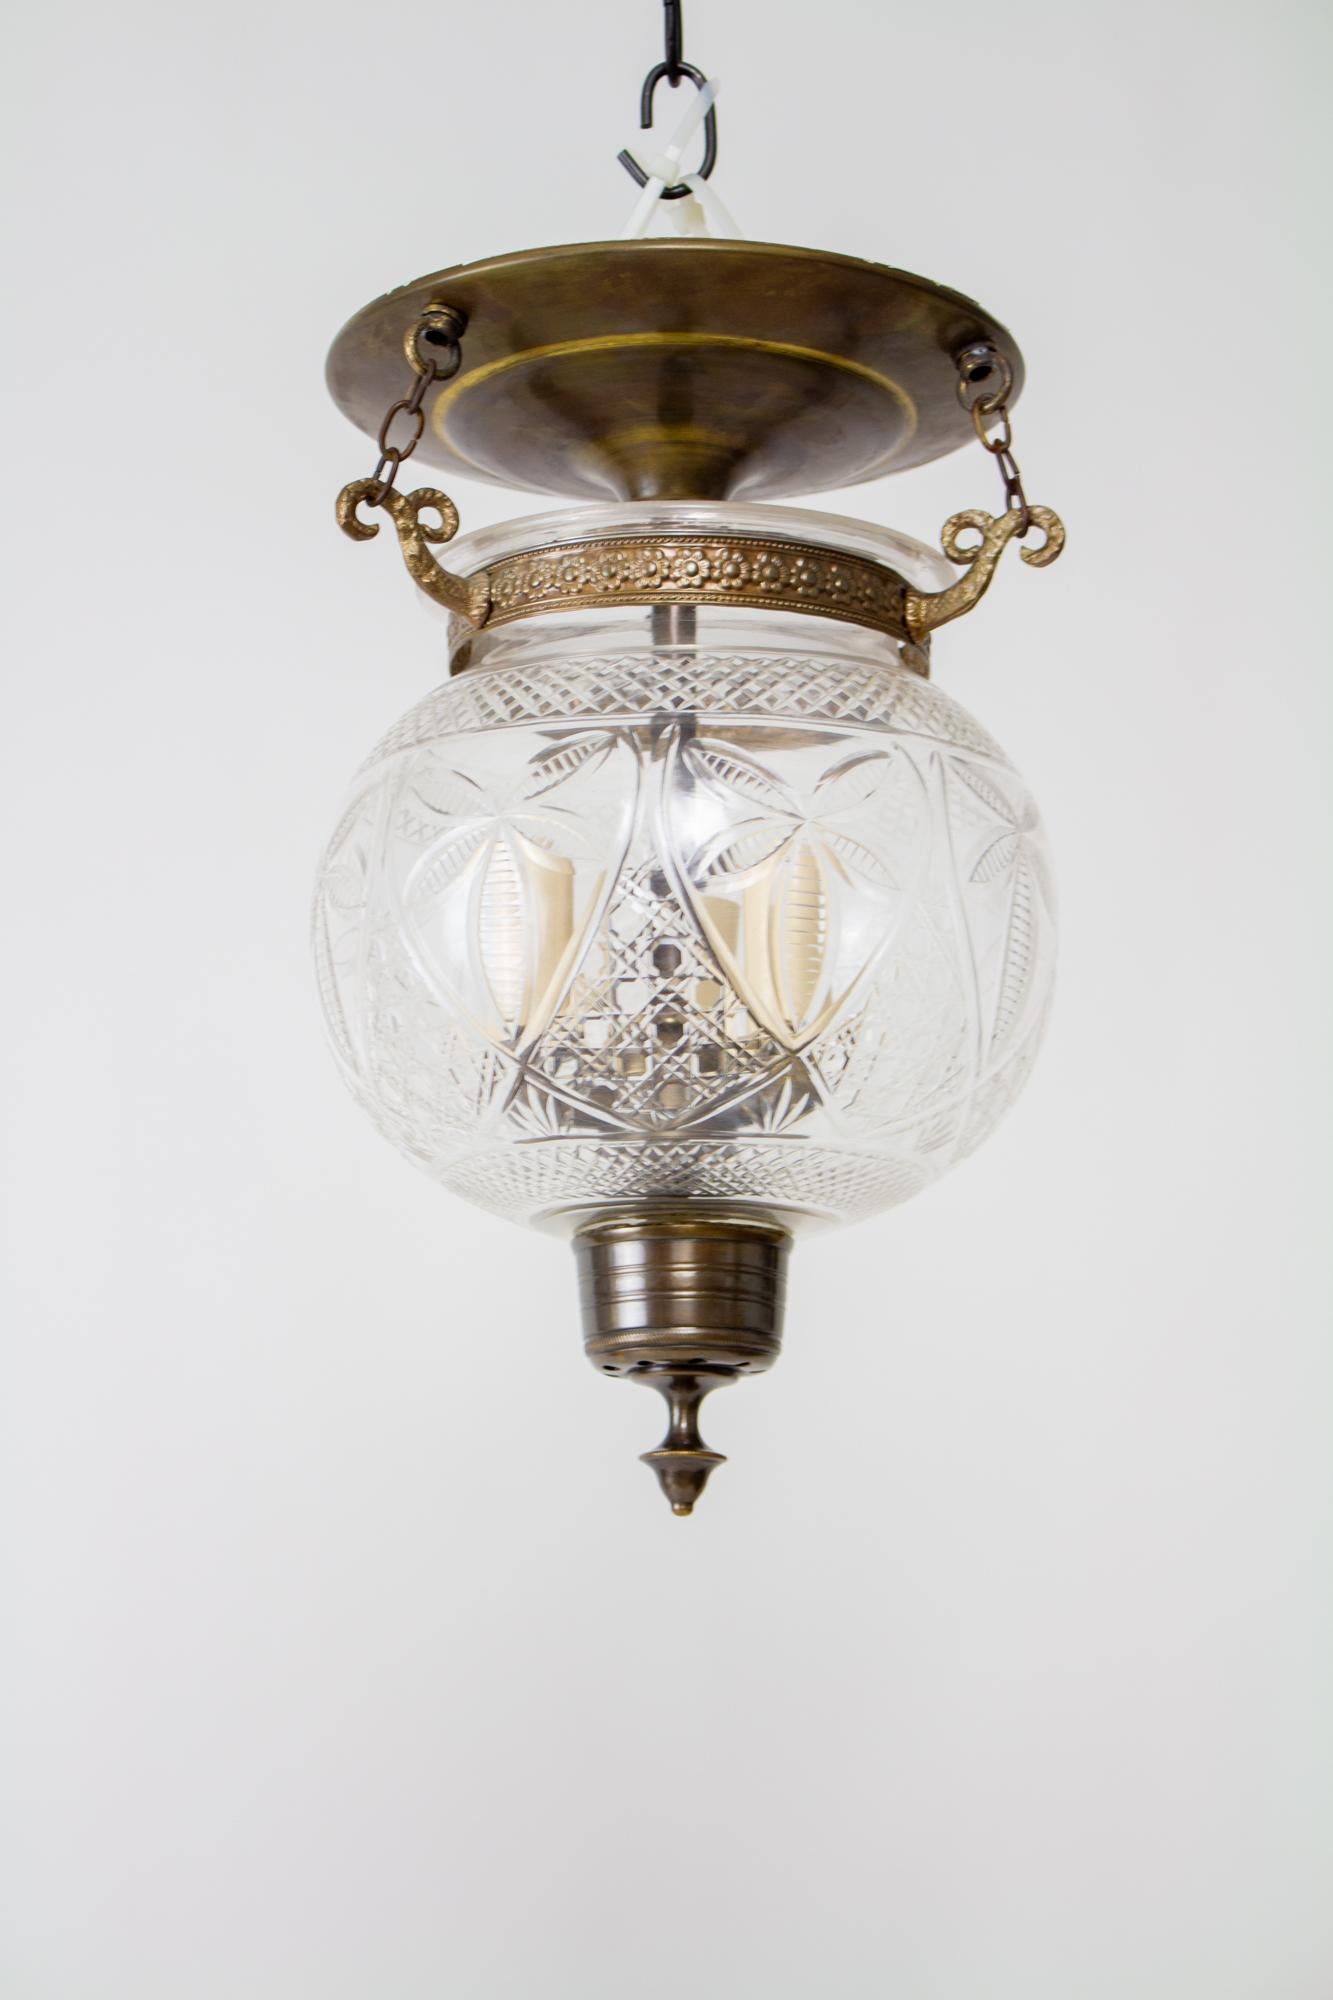 Bell jar lanterns first reached popularity in colonial India and due to their lingering popularity, production has continued to the present. Made from delicately blown clear glass with an engraved crosshatch and leaf pattern. The Glass is suspended